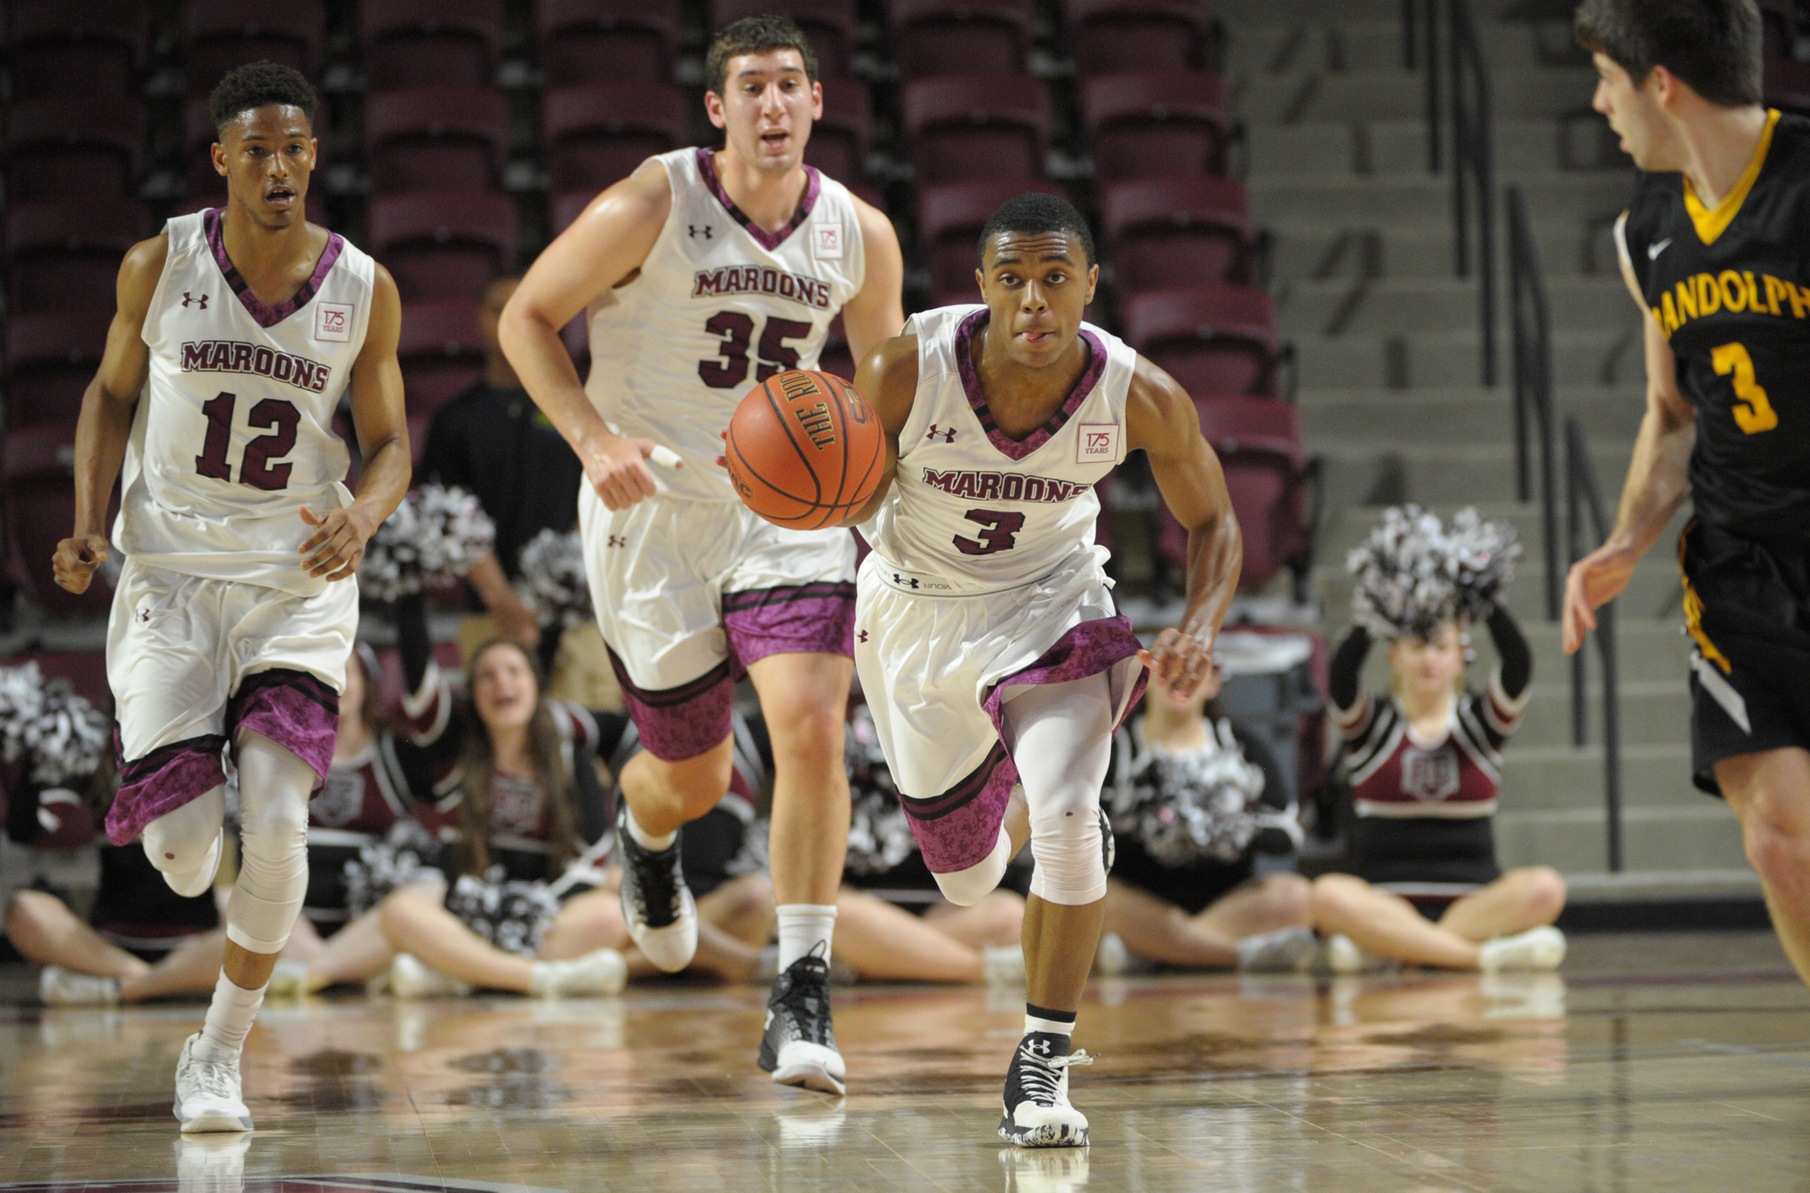 Roanoke Tops Randolph 85-68 in ODAC Tournament; Will Face Emory & Henry Thursday